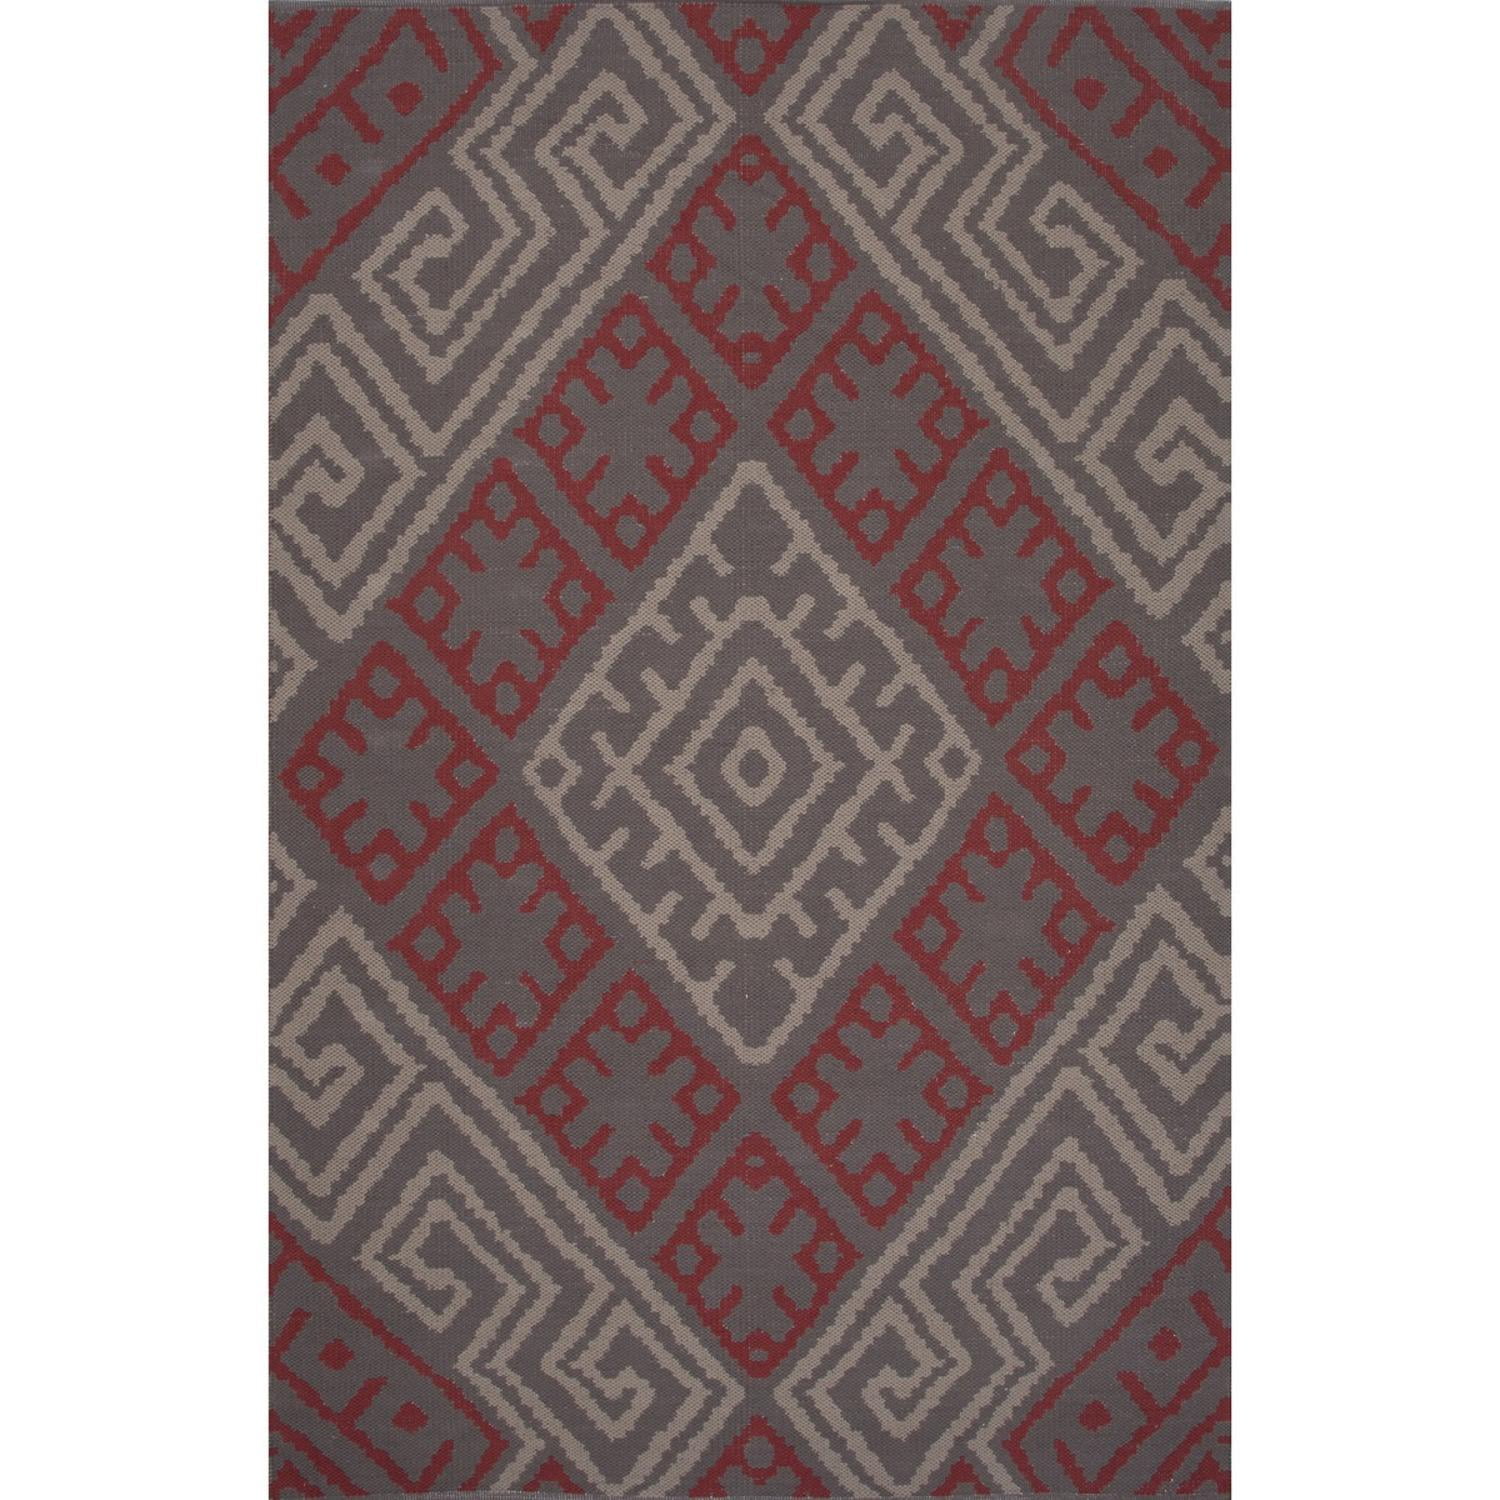 240x330cm **FREE DELIVERY** MIAMI BLOCKS SQUARES RED TAUPE MODERN FLOOR RUG XL 